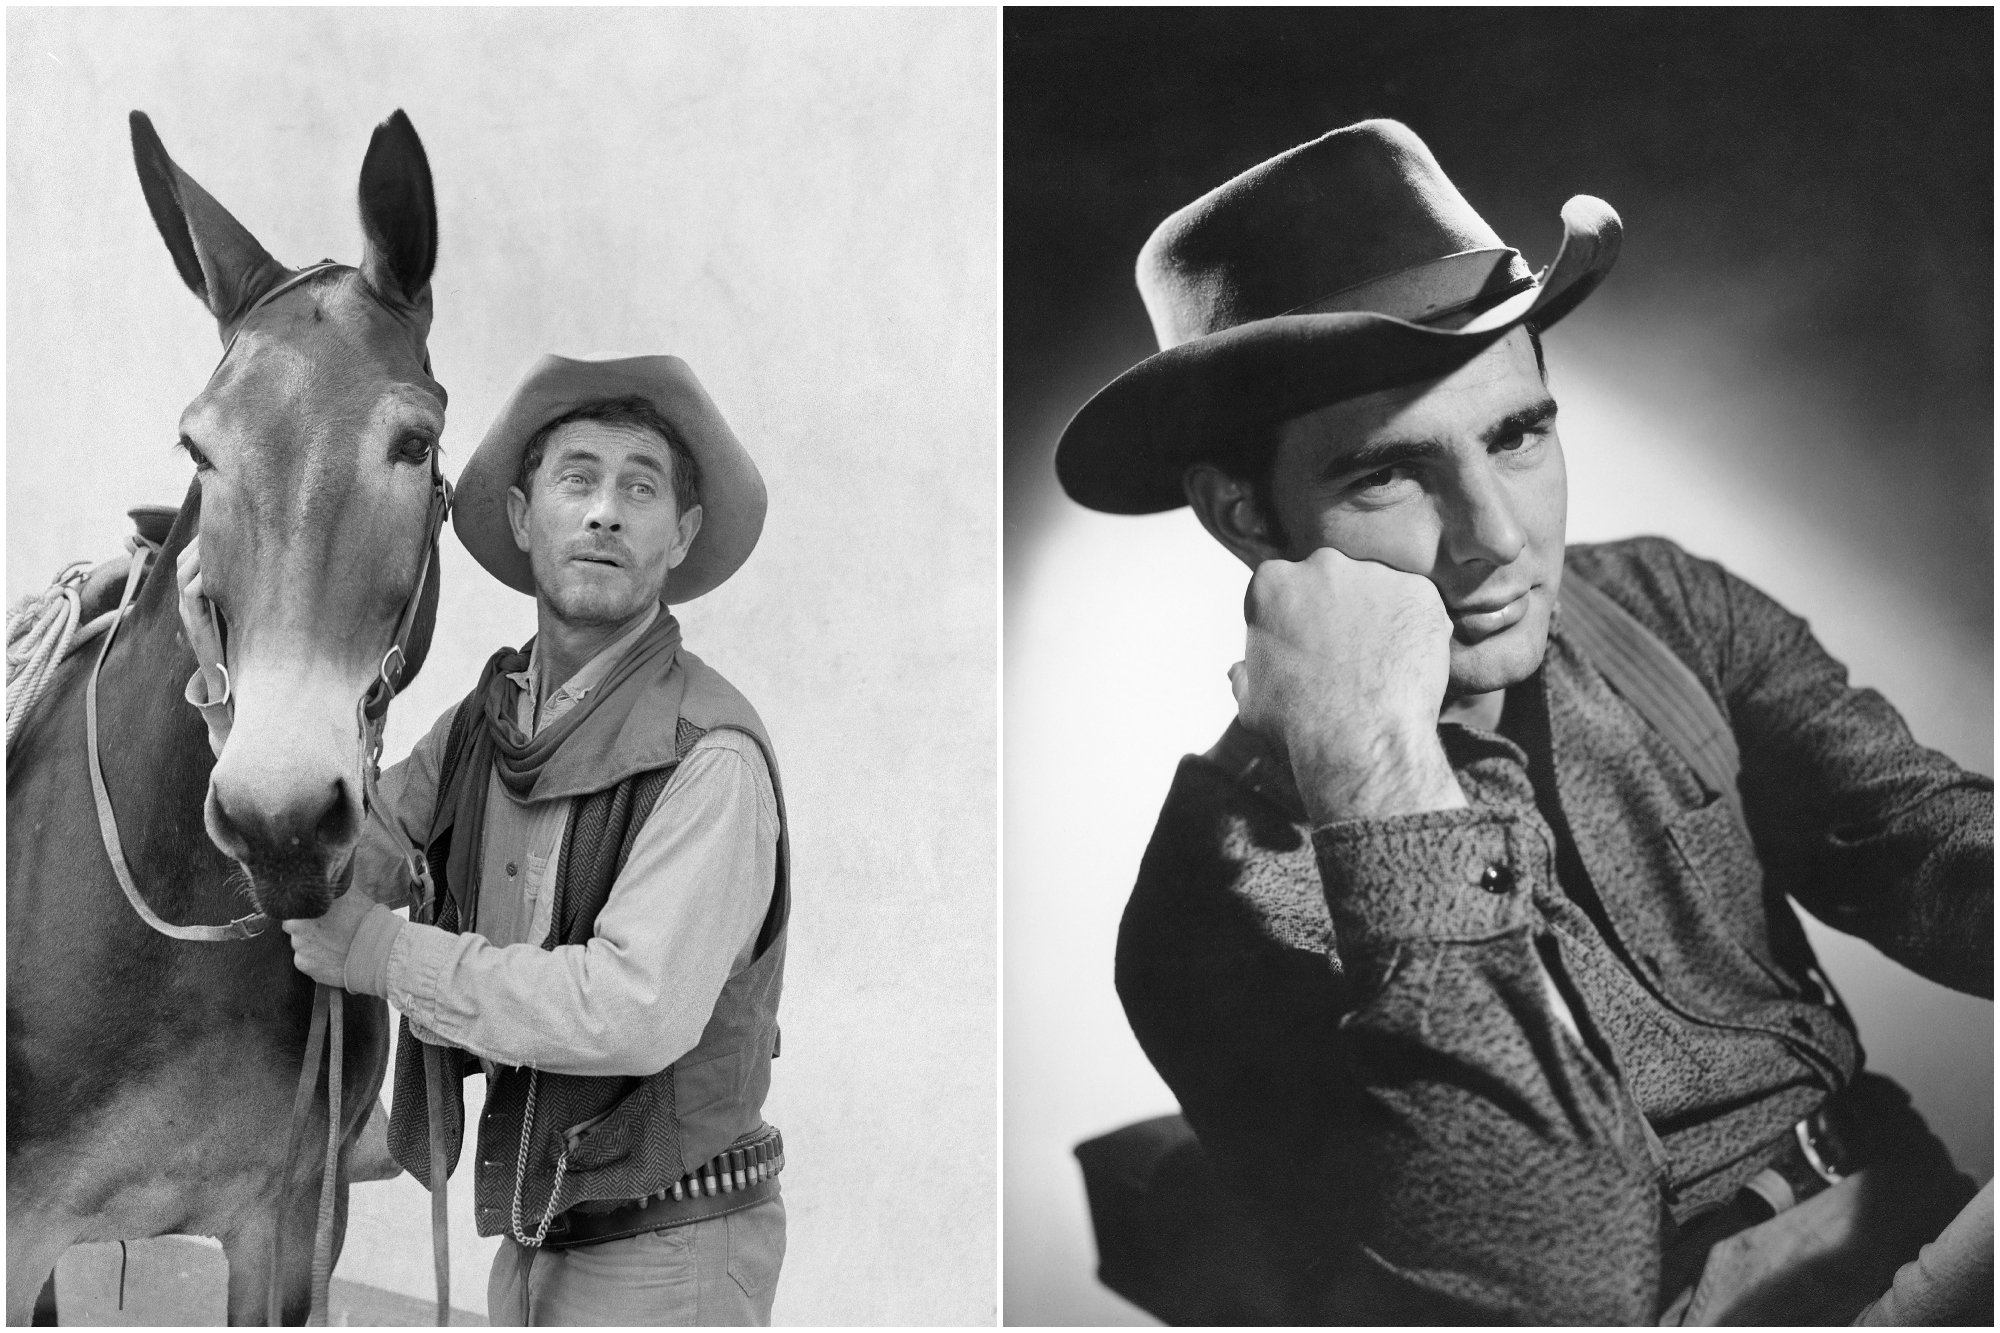 'Gunsmoke' Ken Curtis as Festus and Dennis Weaver as Chester. Curtis is standing next to his horse, holding onto the reins. Weaver is leaning his face against his fist, looking at the camera.